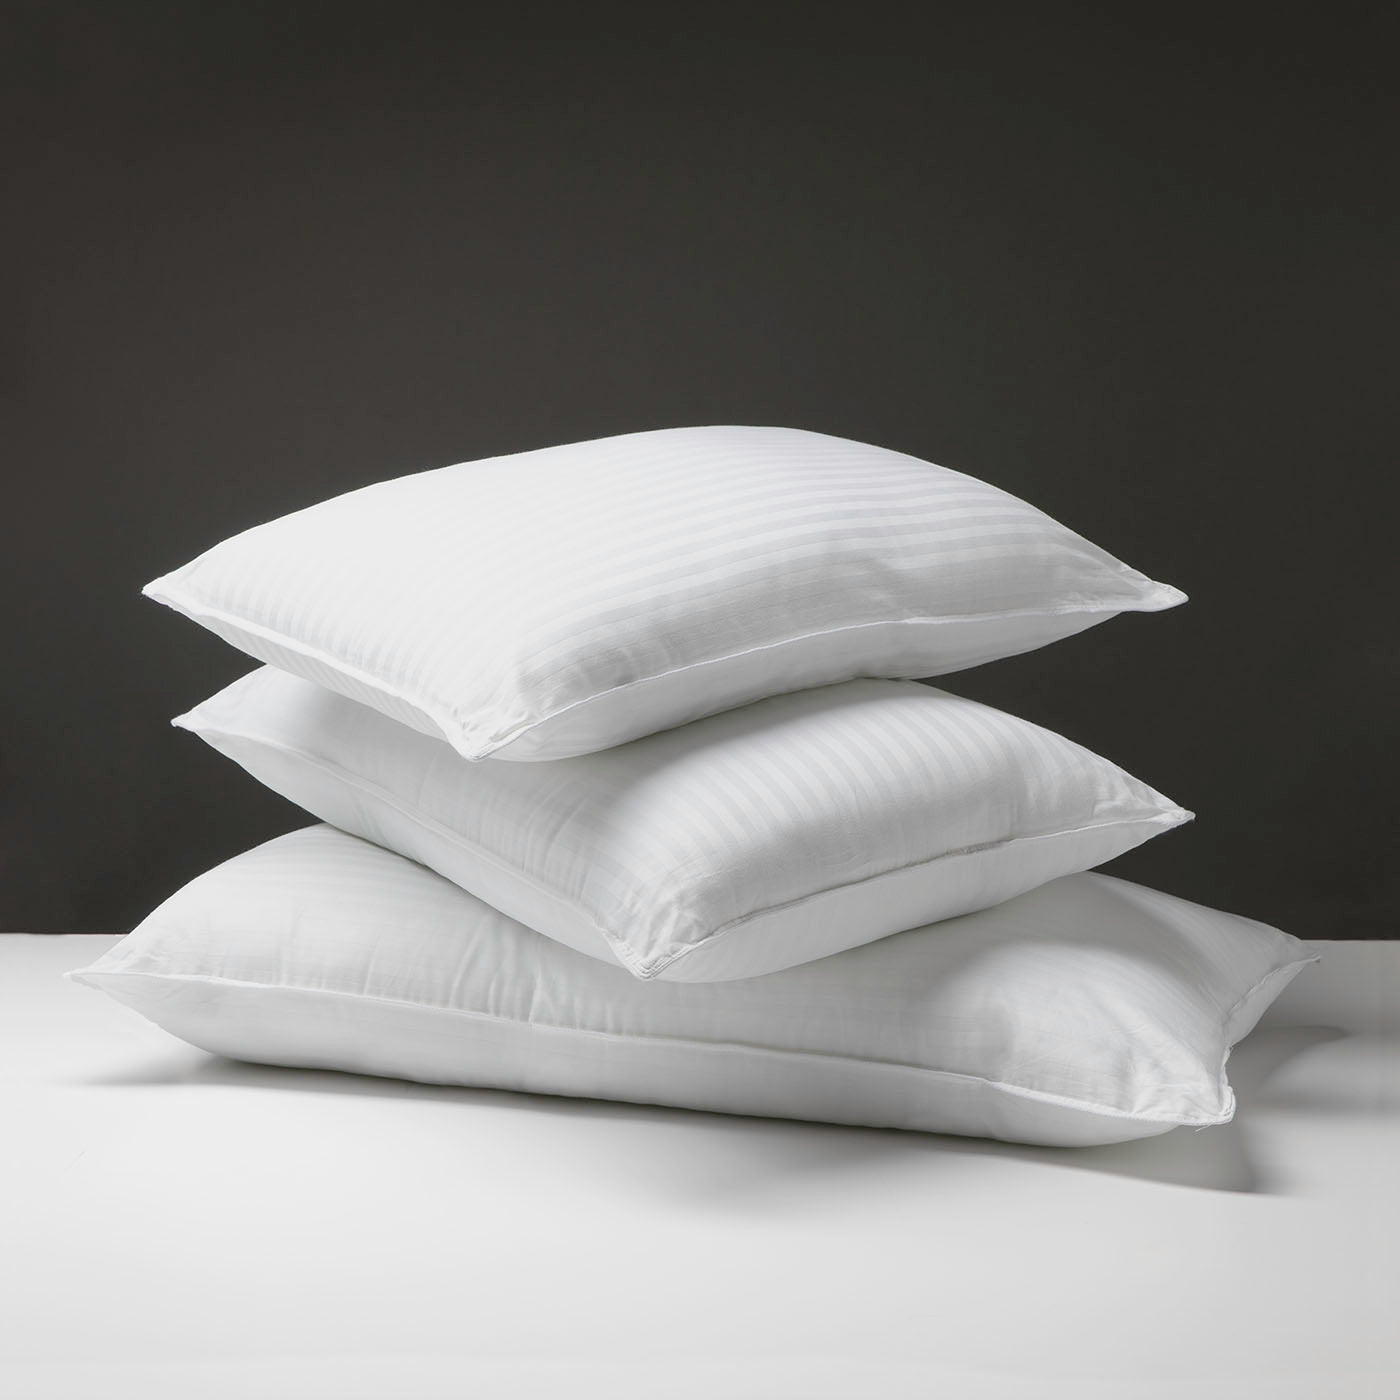  Sobel Westex: Hotel Sobella Bed Pillow for Sleeping, Side  Sleeper Pillow, Hotel Quality, 300 TC, 100% Cotton Case